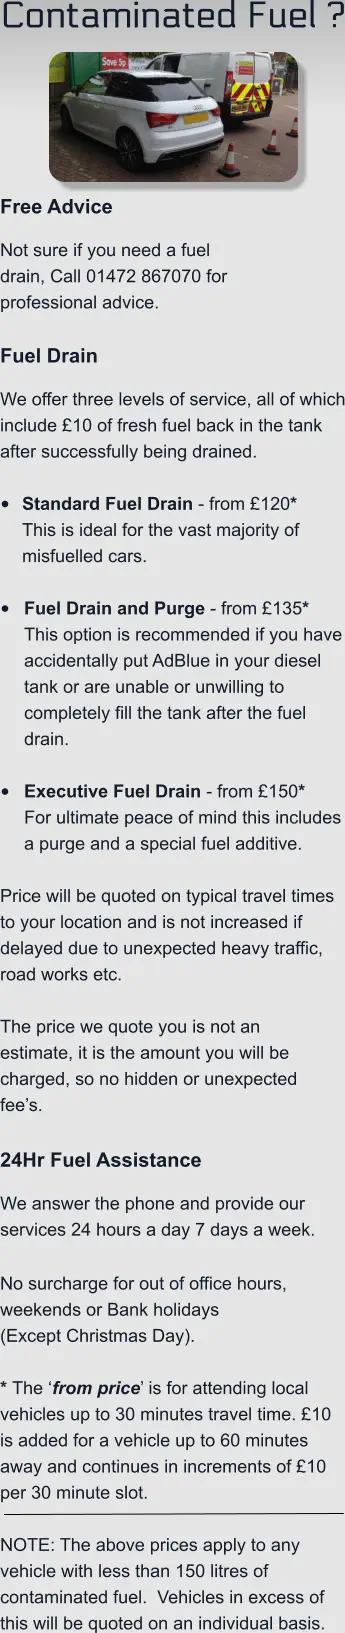 Contaminated Fuel ?    Free Advice Not sure if you need a fuel drain, Call 01472 867070 for professional advice.  Fuel Drain We offer three levels of service, all of which include £10 of fresh fuel back in the tank after successfully being drained.  •	Standard Fuel Drain - from £120*This is ideal for the vast majority of misfuelled cars.  •	Fuel Drain and Purge - from £135*This option is recommended if you have accidentally put AdBlue in your diesel tank or are unable or unwilling to completely fill the tank after the fuel drain. •	Executive Fuel Drain - from £150*For ultimate peace of mind this includes a purge and a special fuel additive.  Price will be quoted on typical travel times to your location and is not increased if delayed due to unexpected heavy traffic, road works etc.    The price we quote you is not an estimate, it is the amount you will be charged, so no hidden or unexpected fee’s.  24Hr Fuel Assistance We answer the phone and provide our services 24 hours a day 7 days a week.    No surcharge for out of office hours, weekends or Bank holidays  (Except Christmas Day).  * The ‘from price’ is for attending local vehicles up to 30 minutes travel time. £10 is added for a vehicle up to 60 minutes away and continues in increments of £10 per 30 minute slot.   NOTE: The above prices apply to any vehicle with less than 150 litres of contaminated fuel.  Vehicles in excess of this will be quoted on an individual basis.